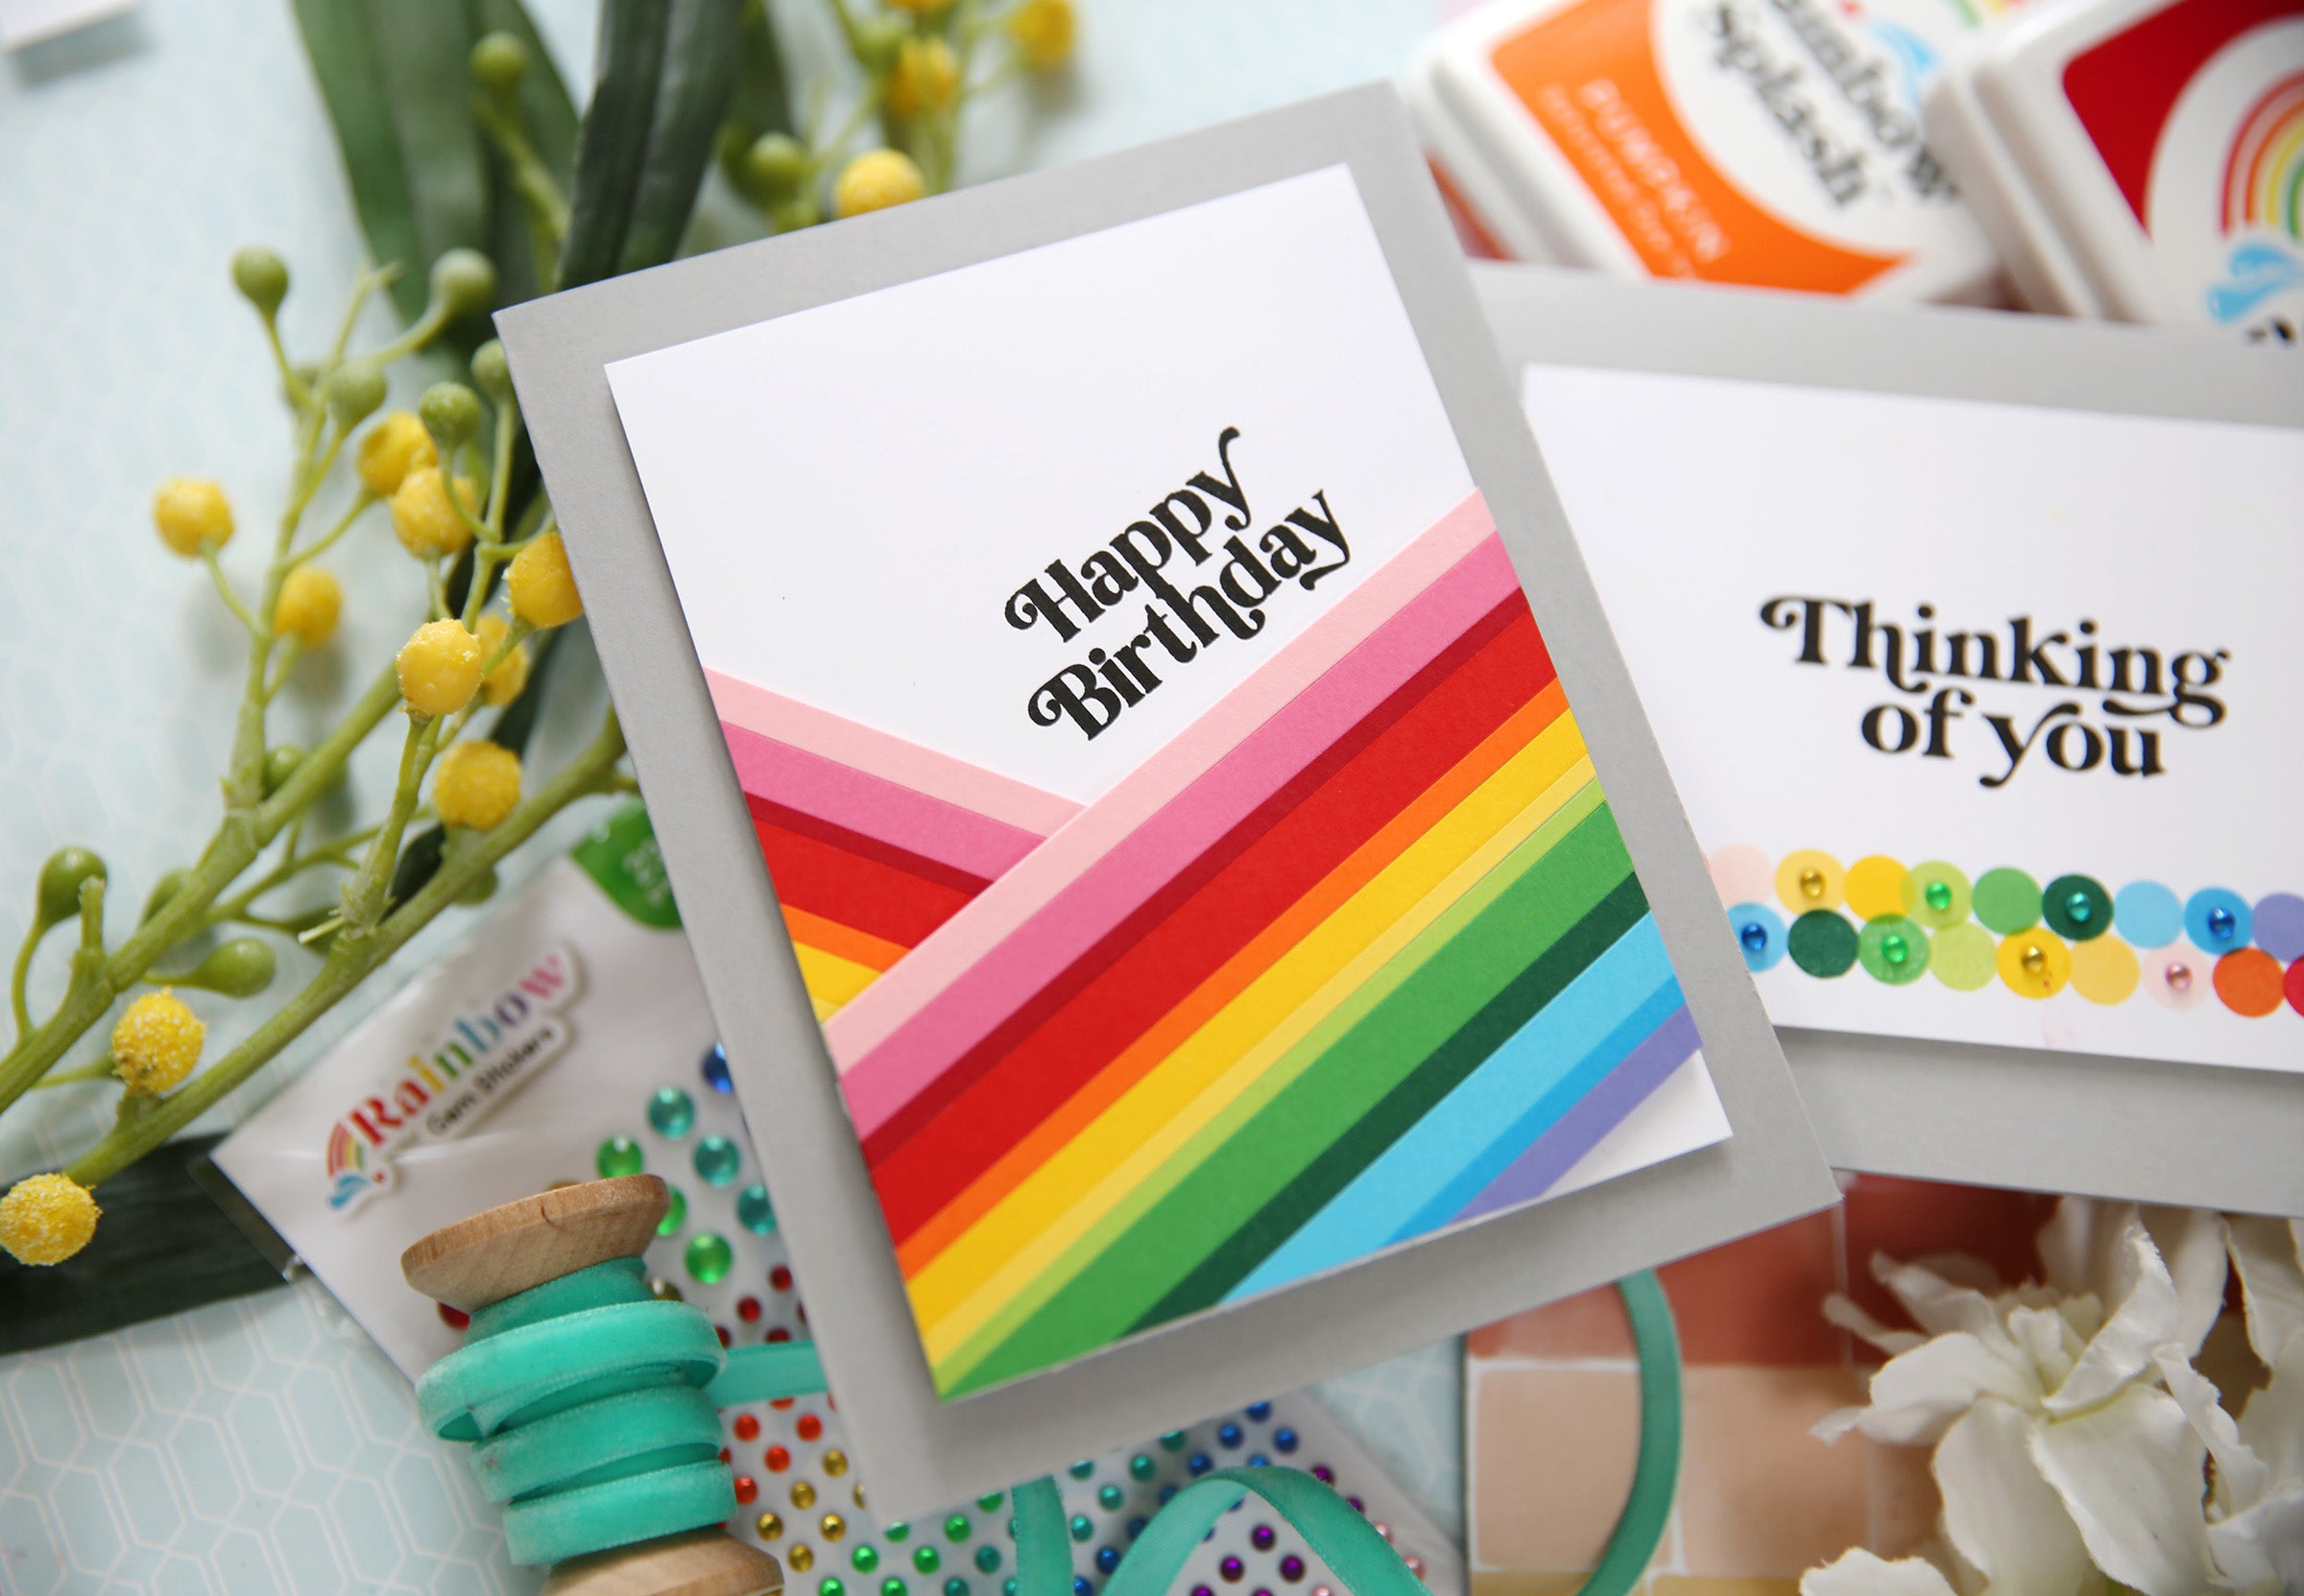 Rainbow Recipe Cards — Colorful Recipe Cards Set - 4x6, Sturdy Cardstock,  Printed on Recycled Paper